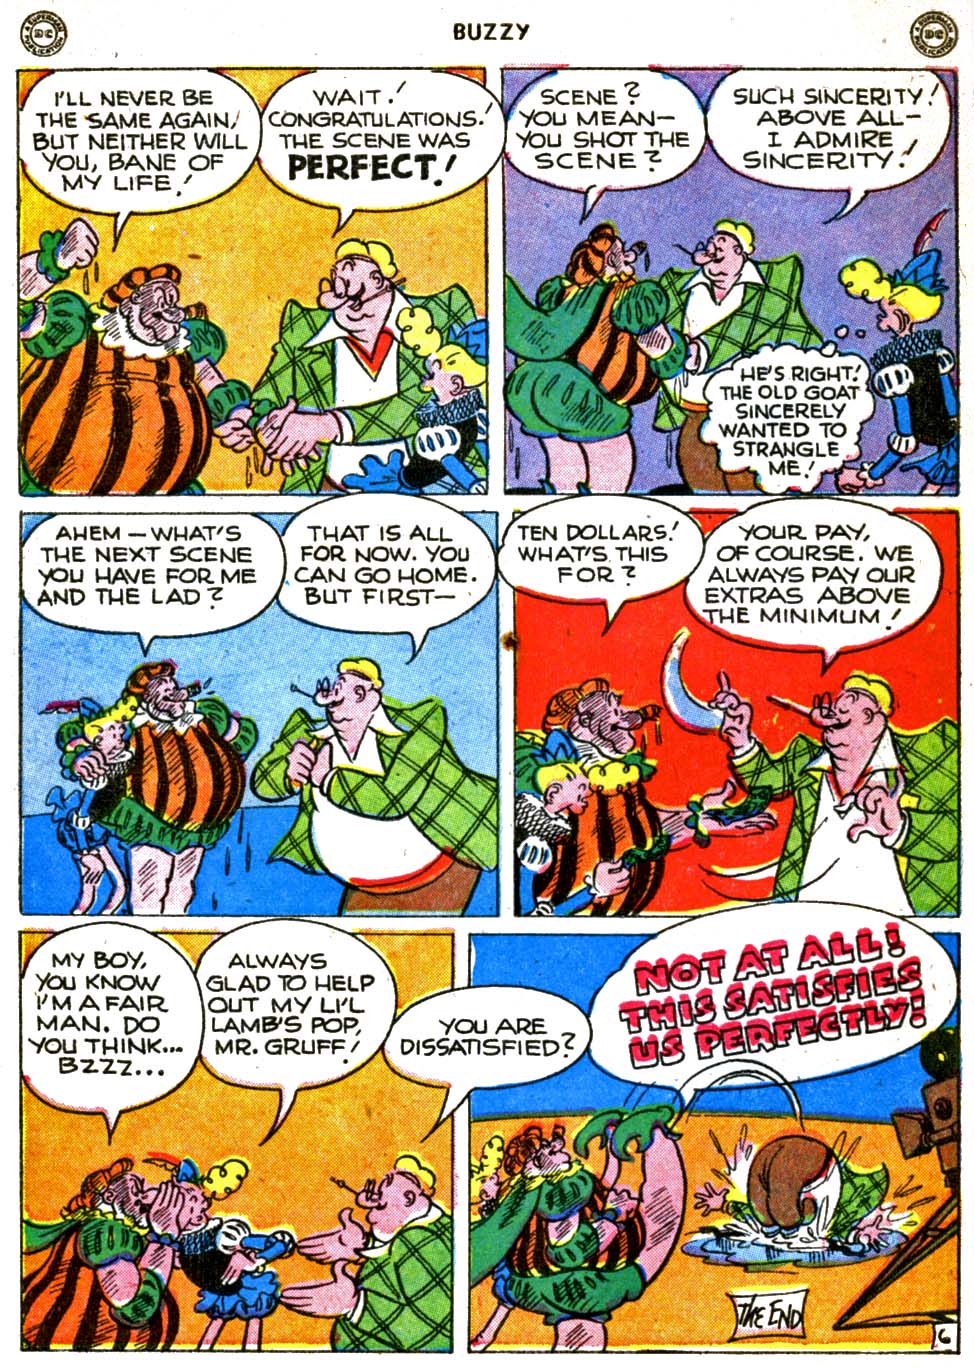 Read online Buzzy comic -  Issue #11 - 48